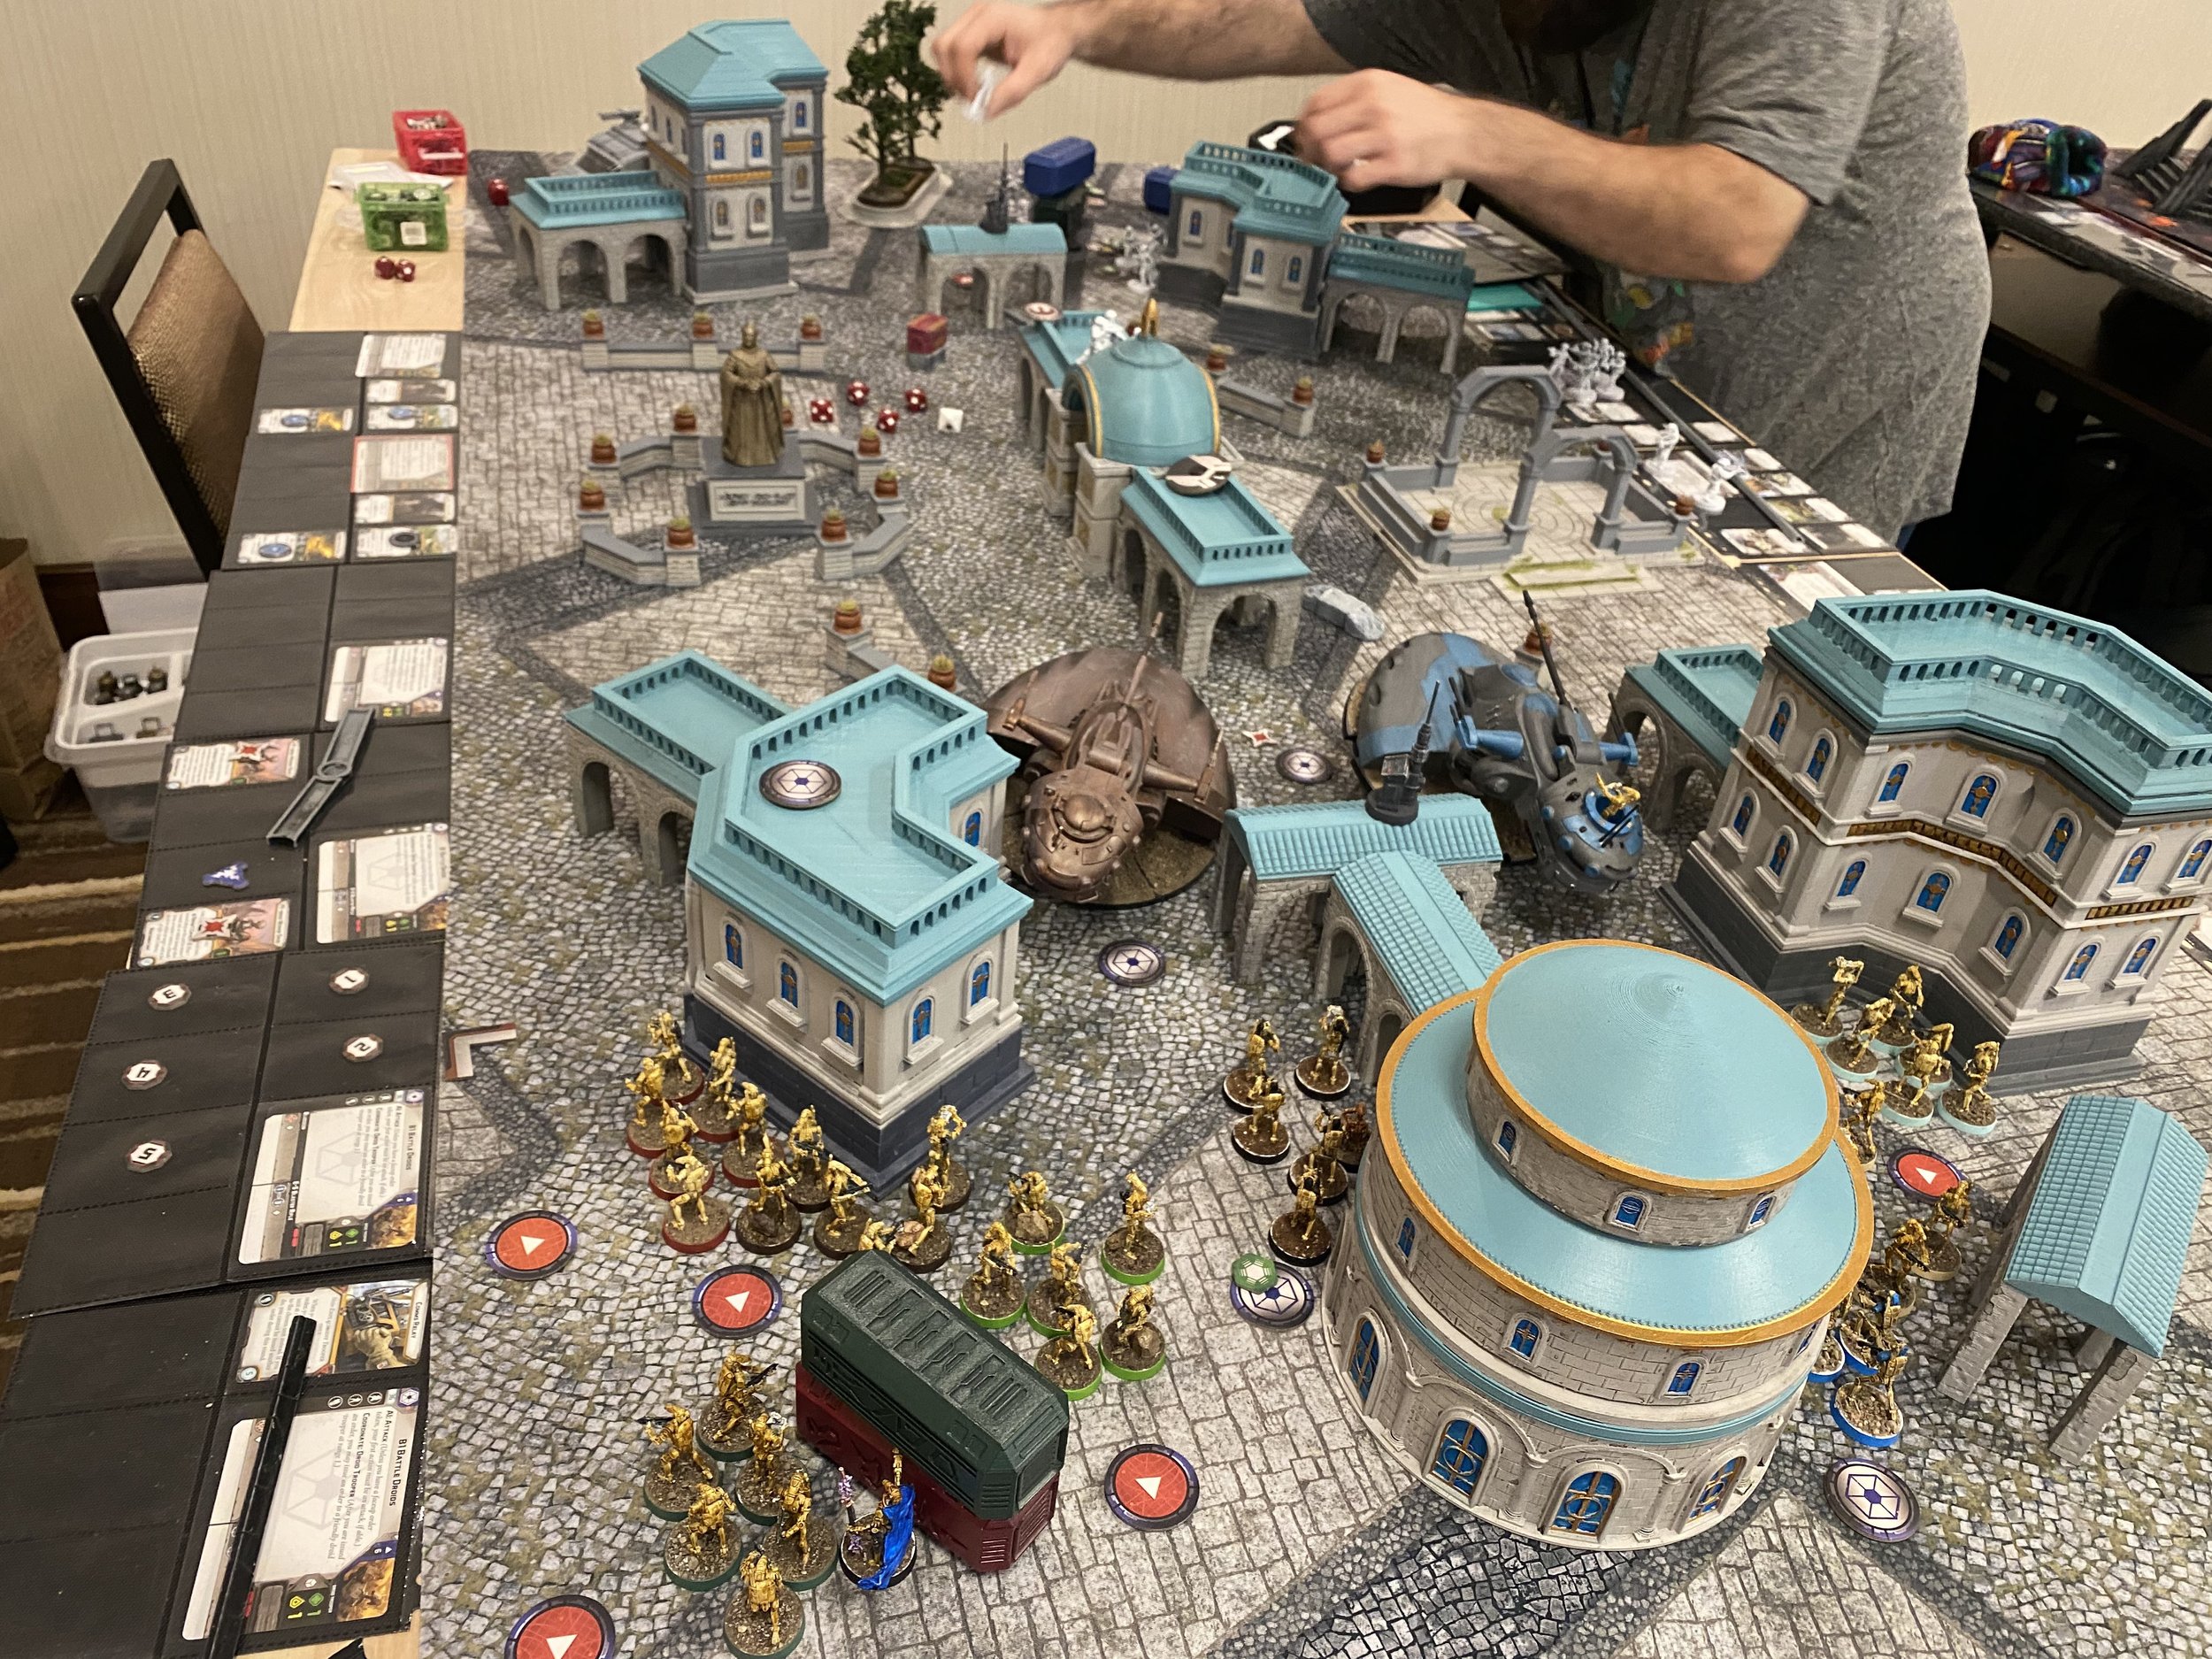 Naboo provided by Mythic Games